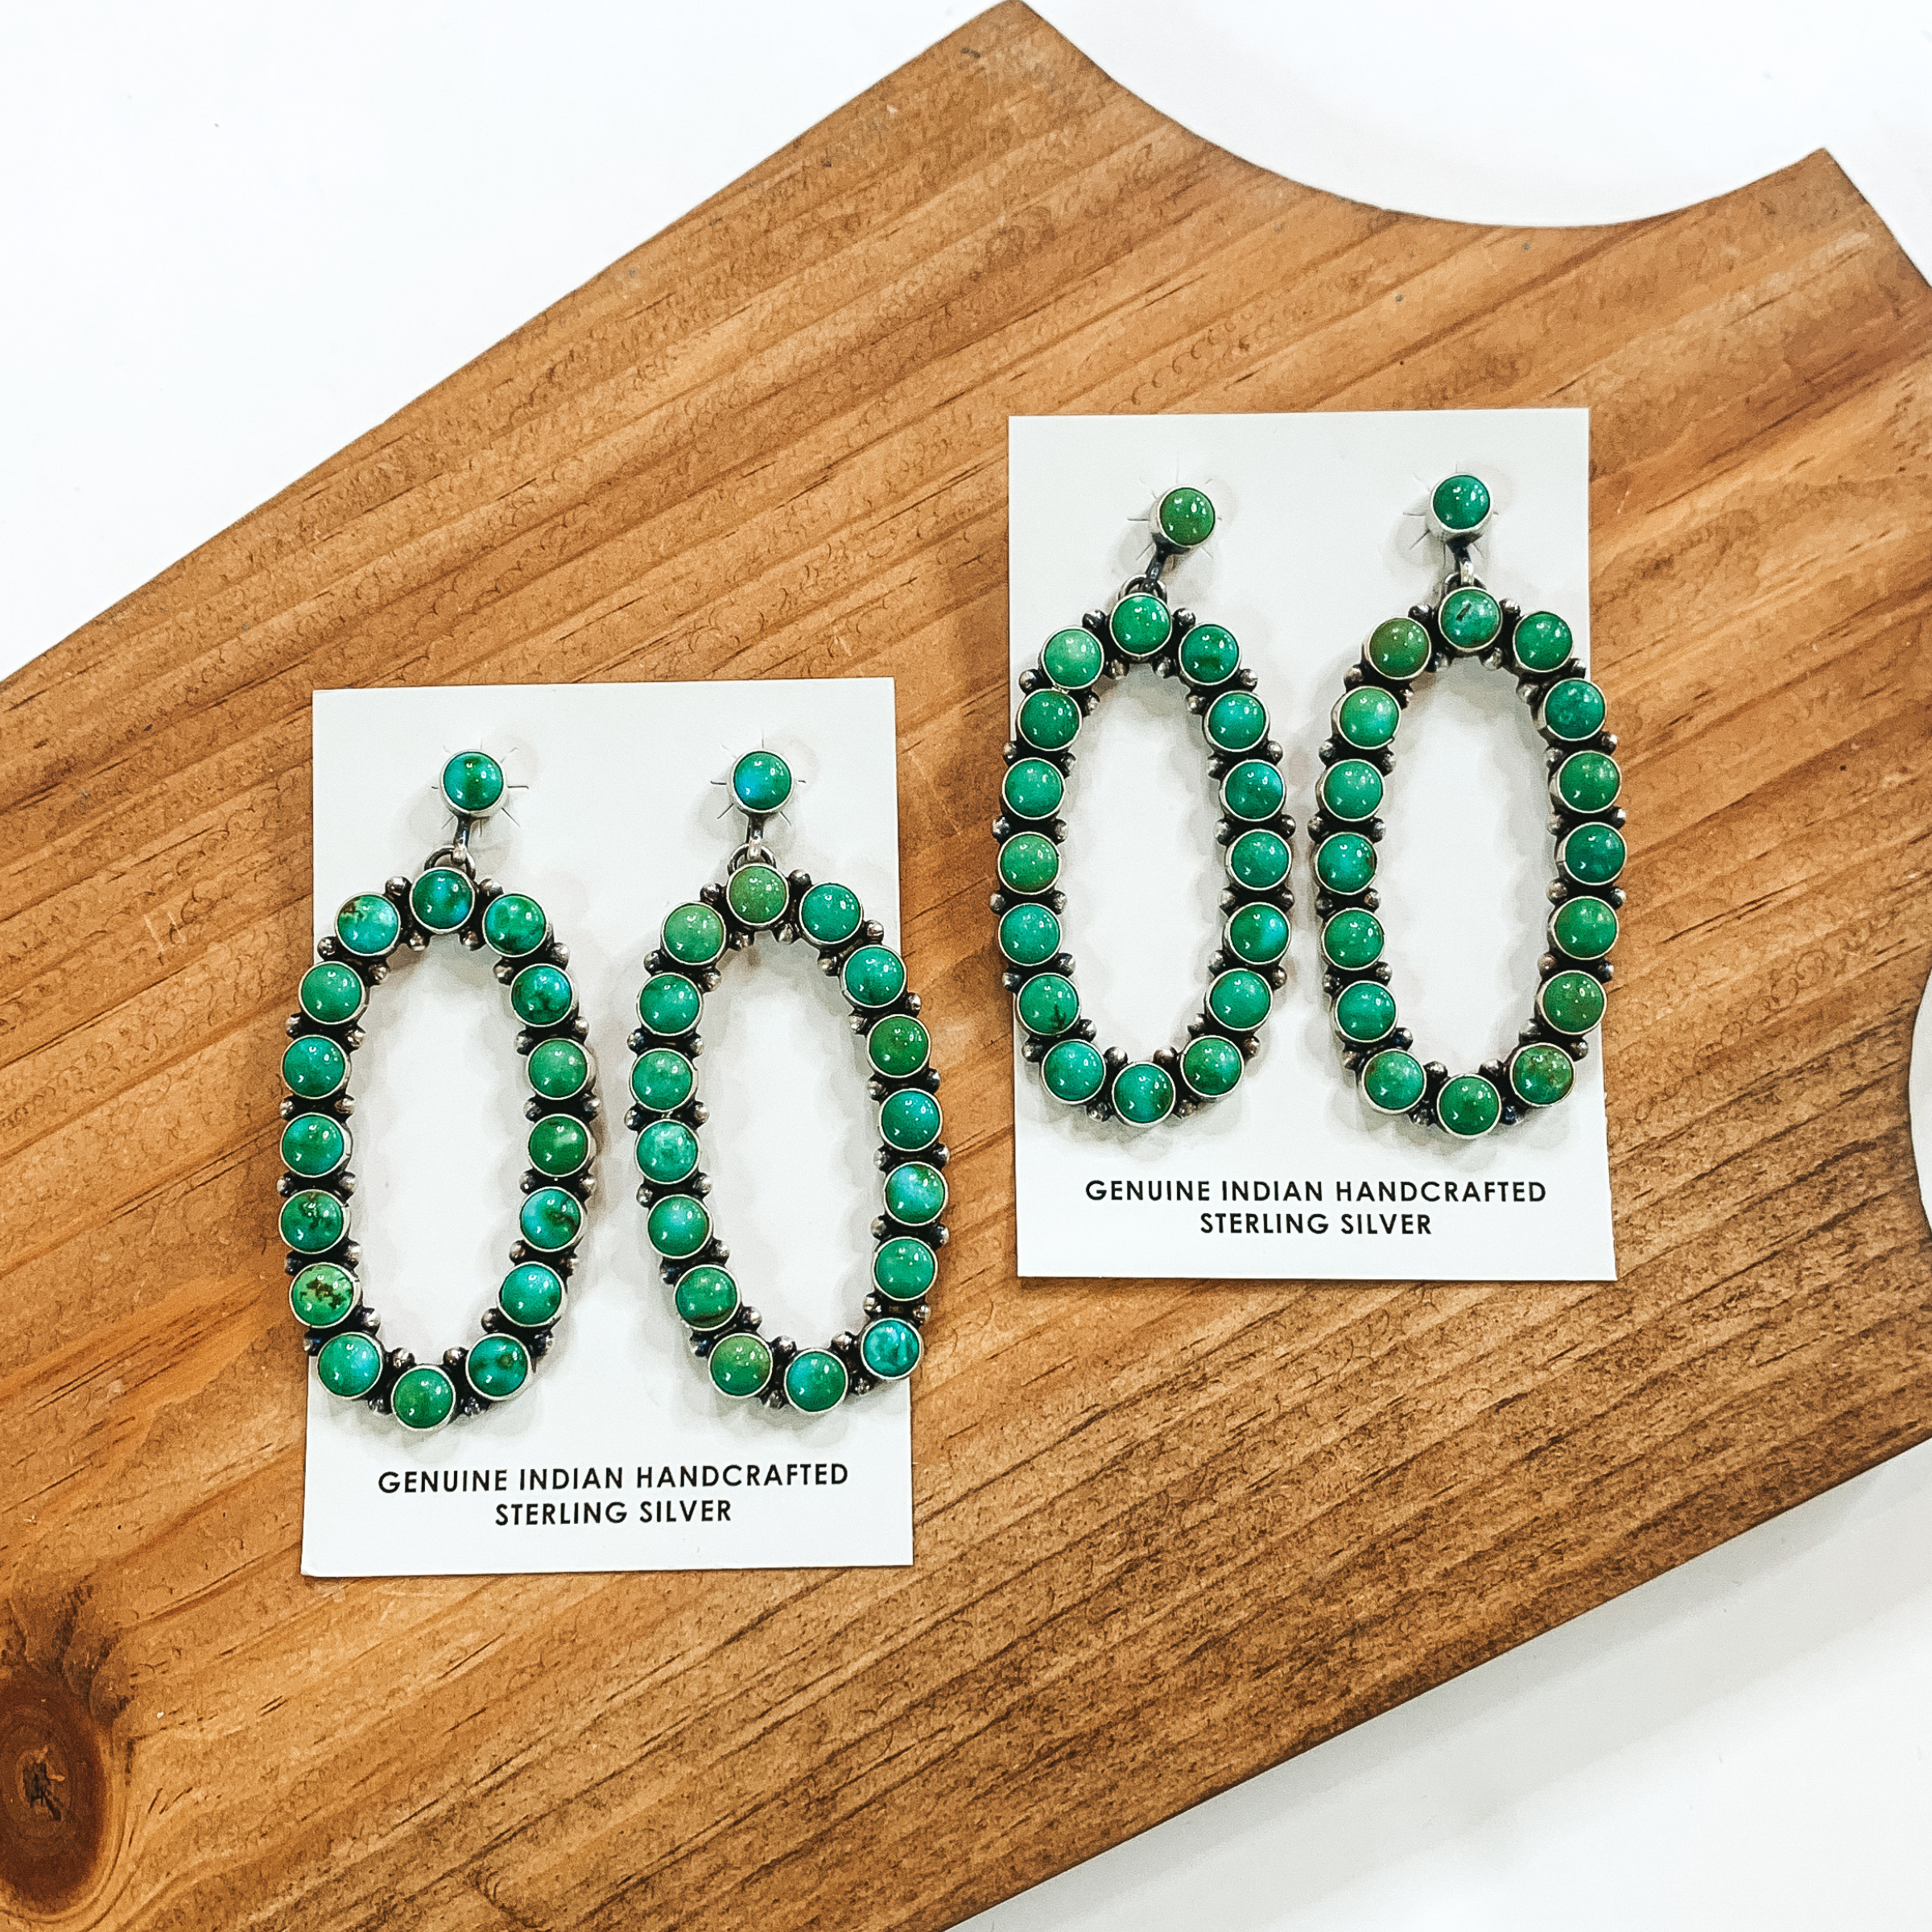 Open oval drop earrings that have green colored stones. There are two pairs of these earrings pictured on a wood block on a white background. 